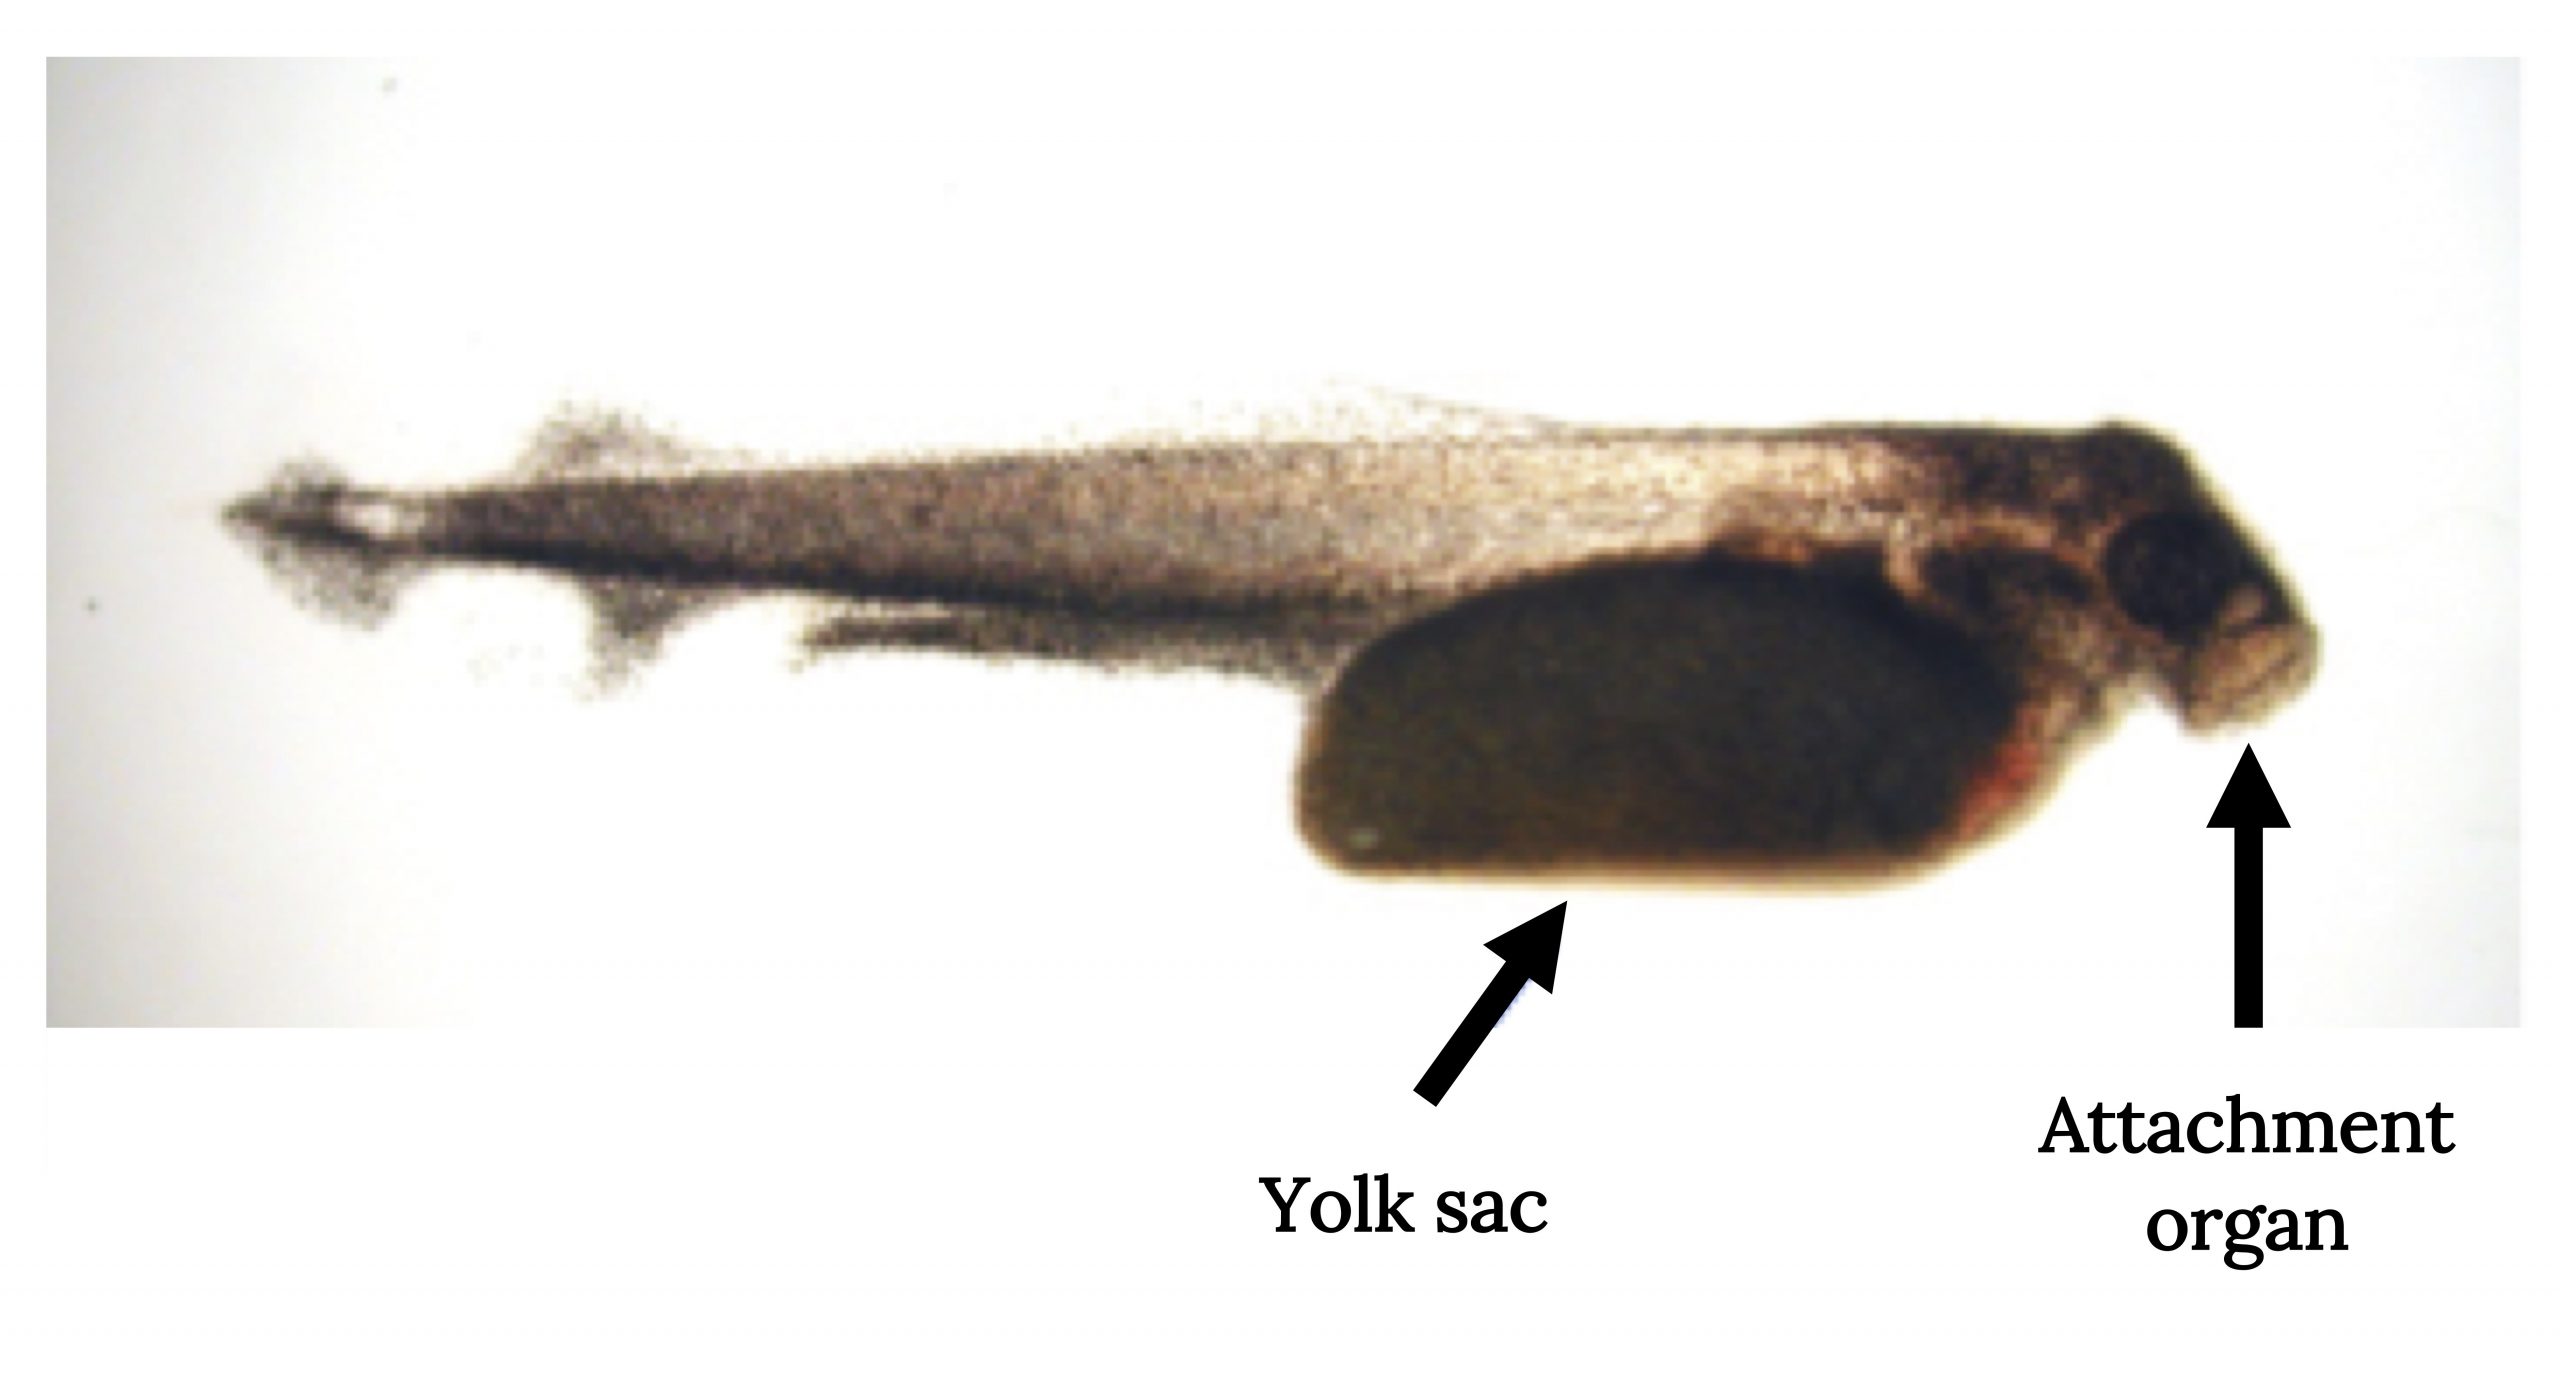 Larval gar with yolk sac identified at the side of the front portion of fish and an attachment organ identified at the head